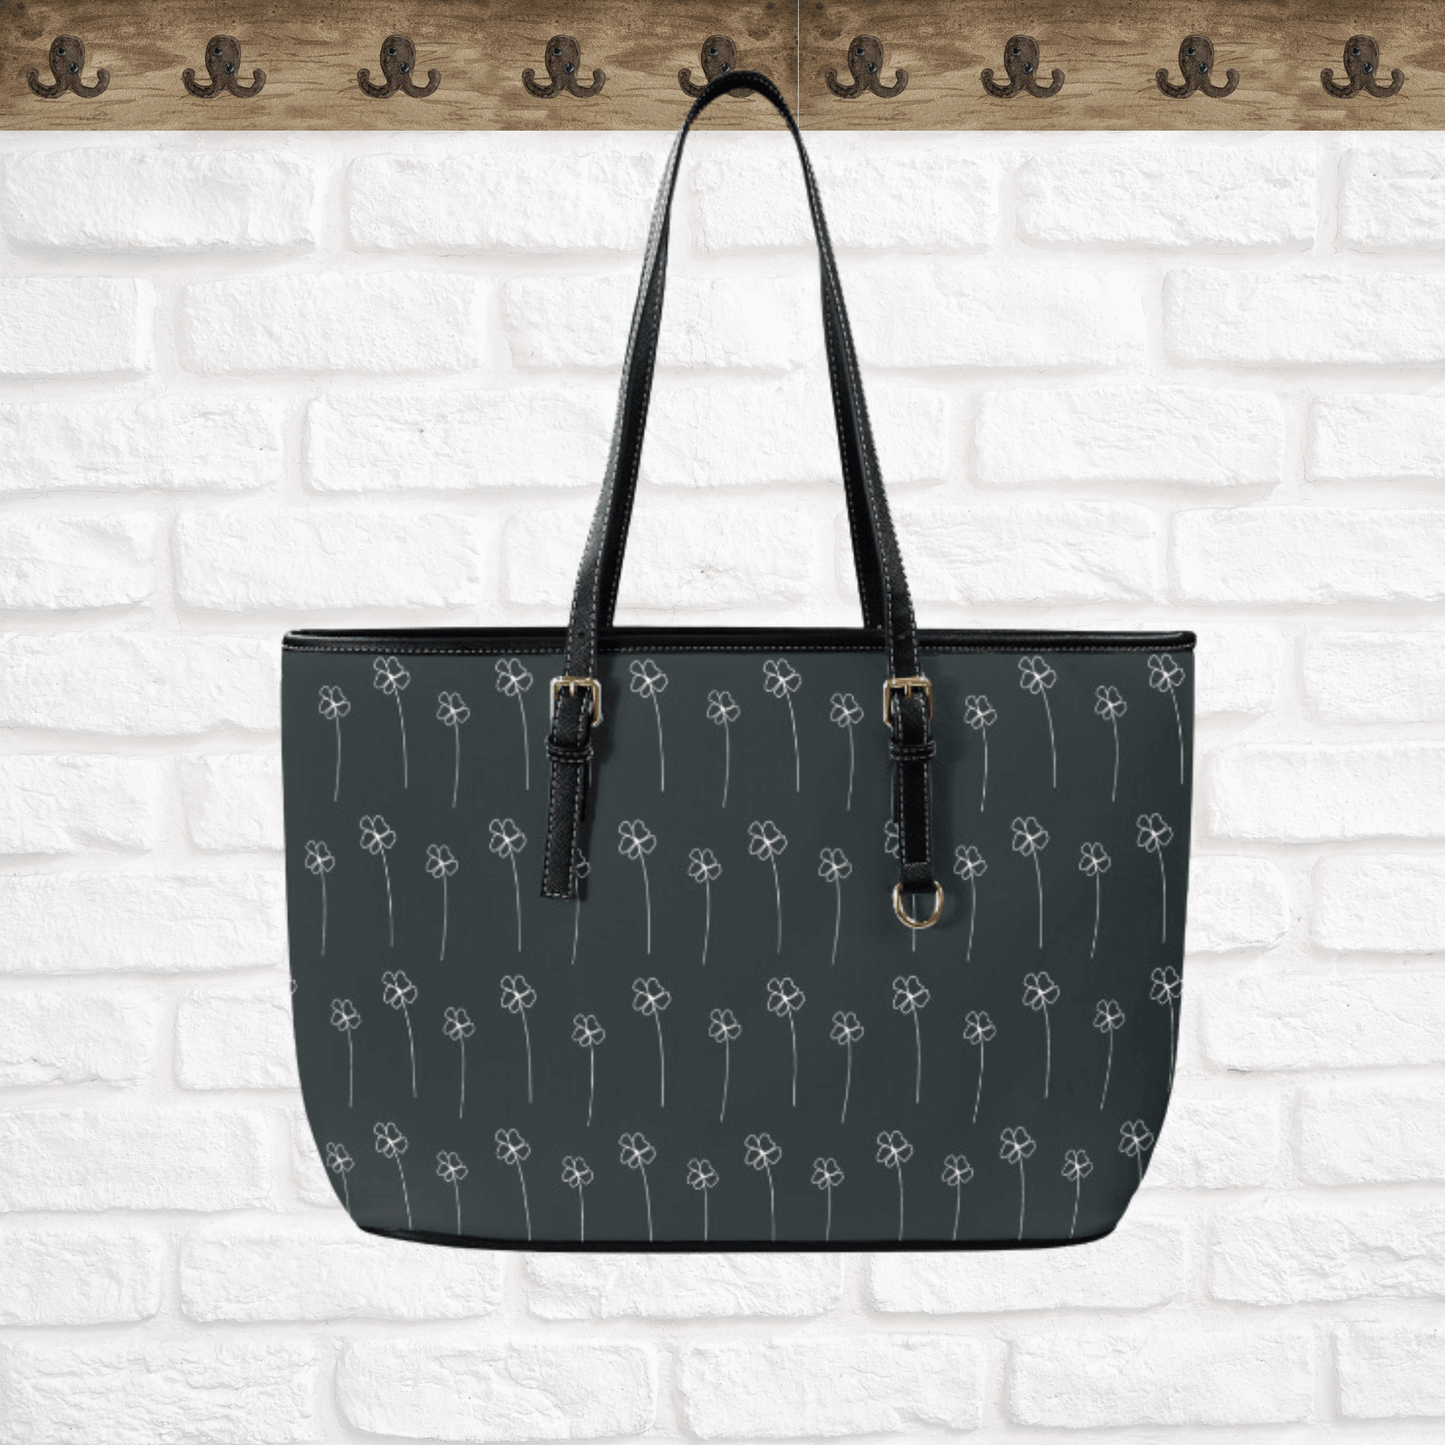 OUr faux leather tote bag has a black background with tiny off-white flowers.